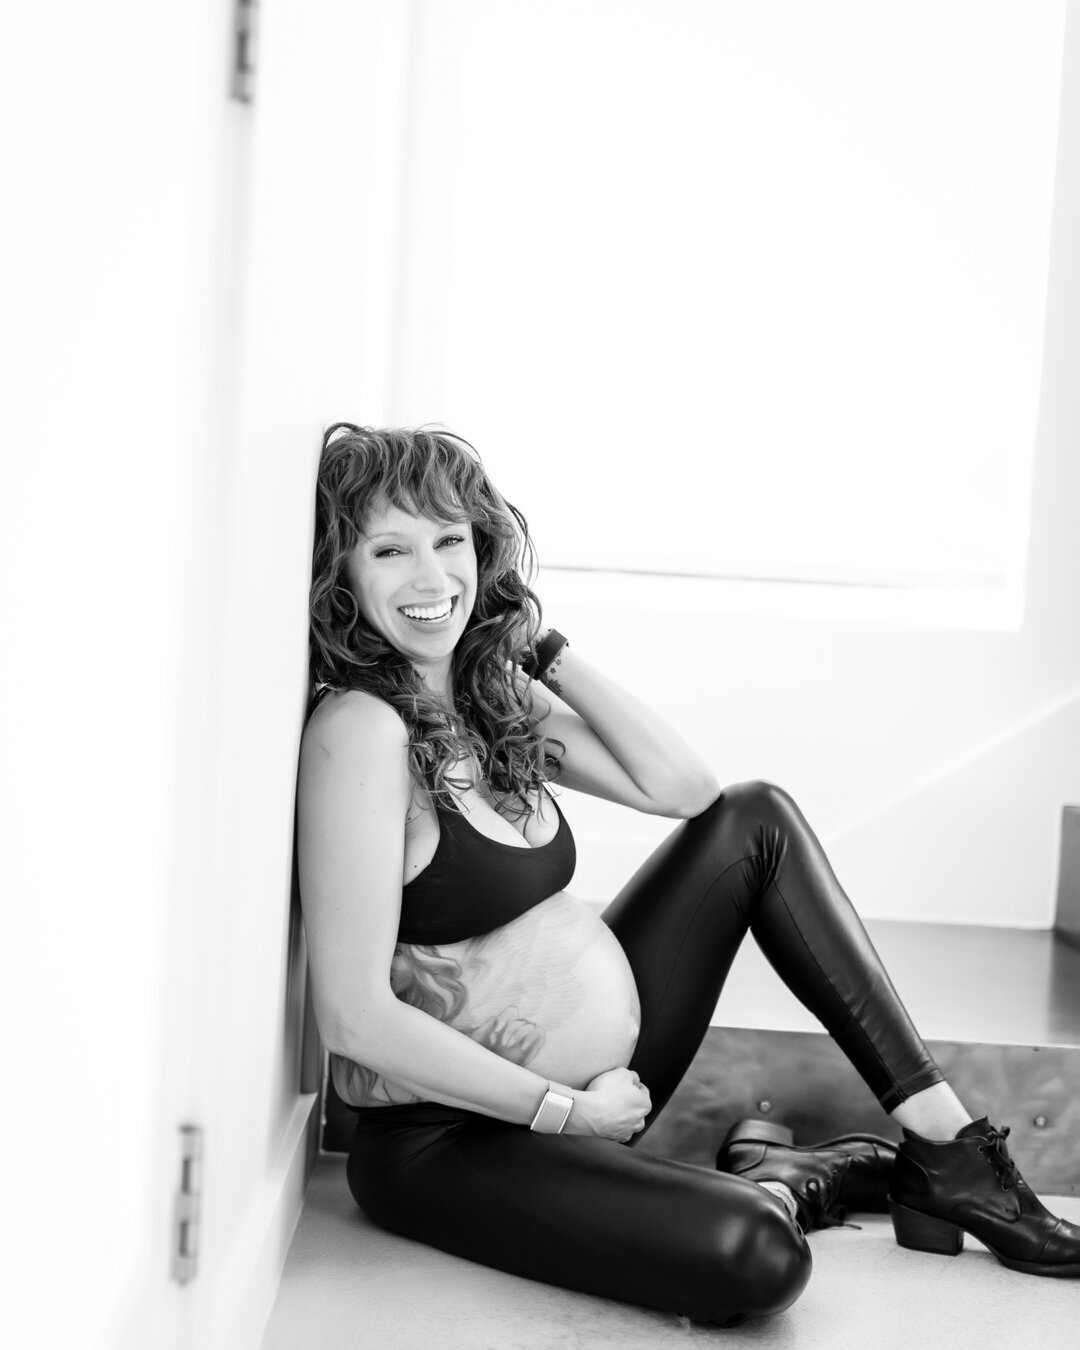 Celebrate the miracle of new life with our maternity photography services in Austin